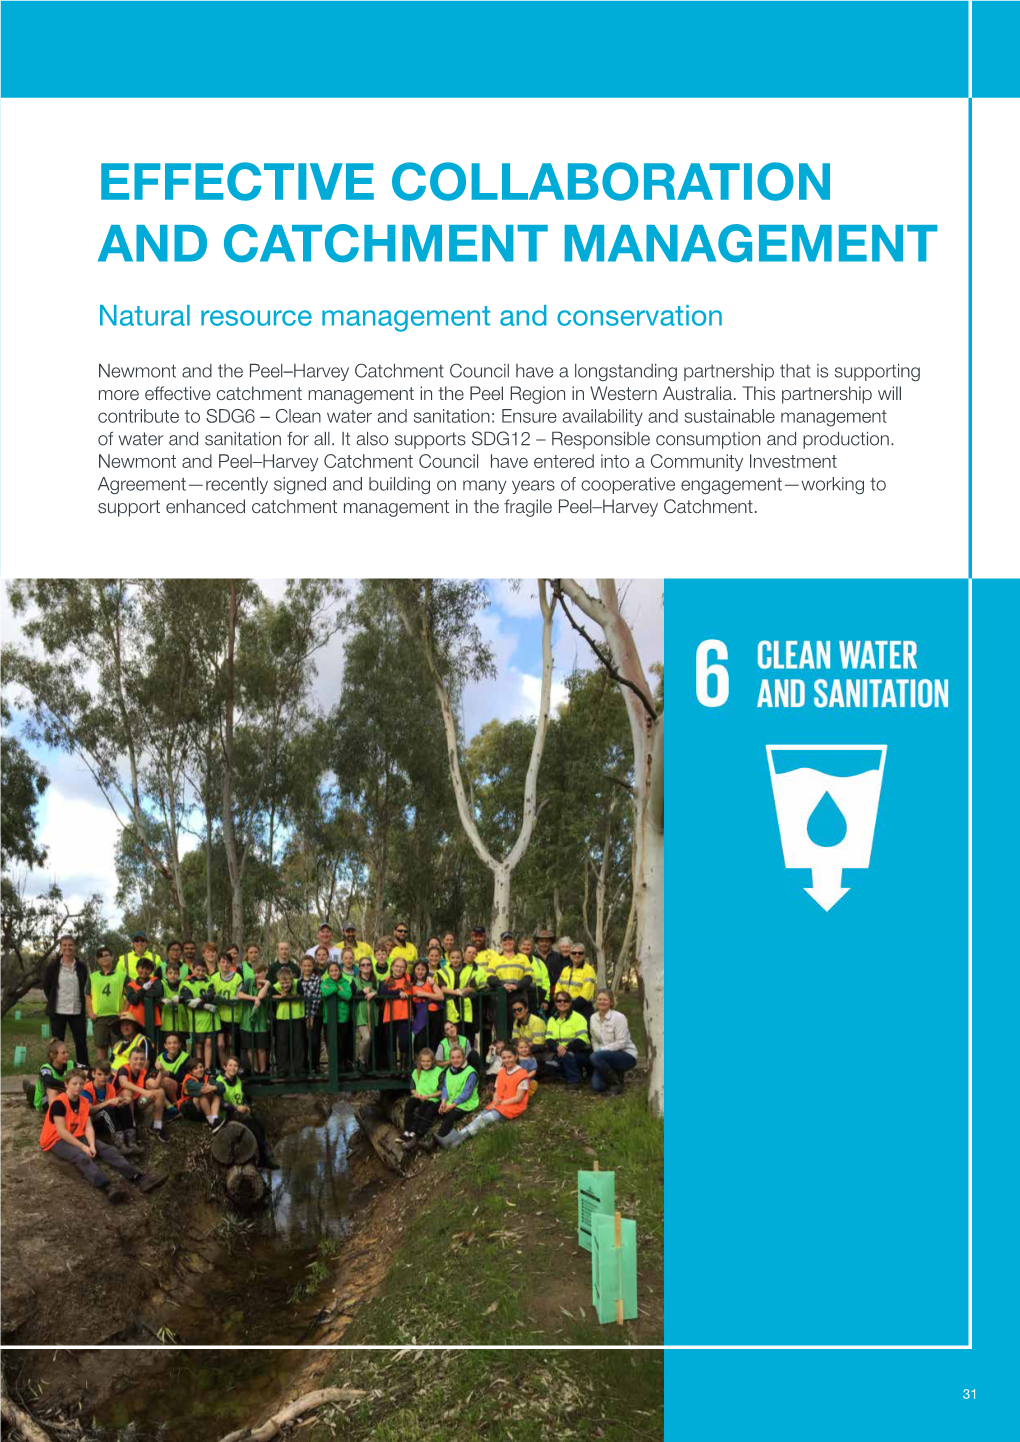 Effective Collaboration and Catchment Management